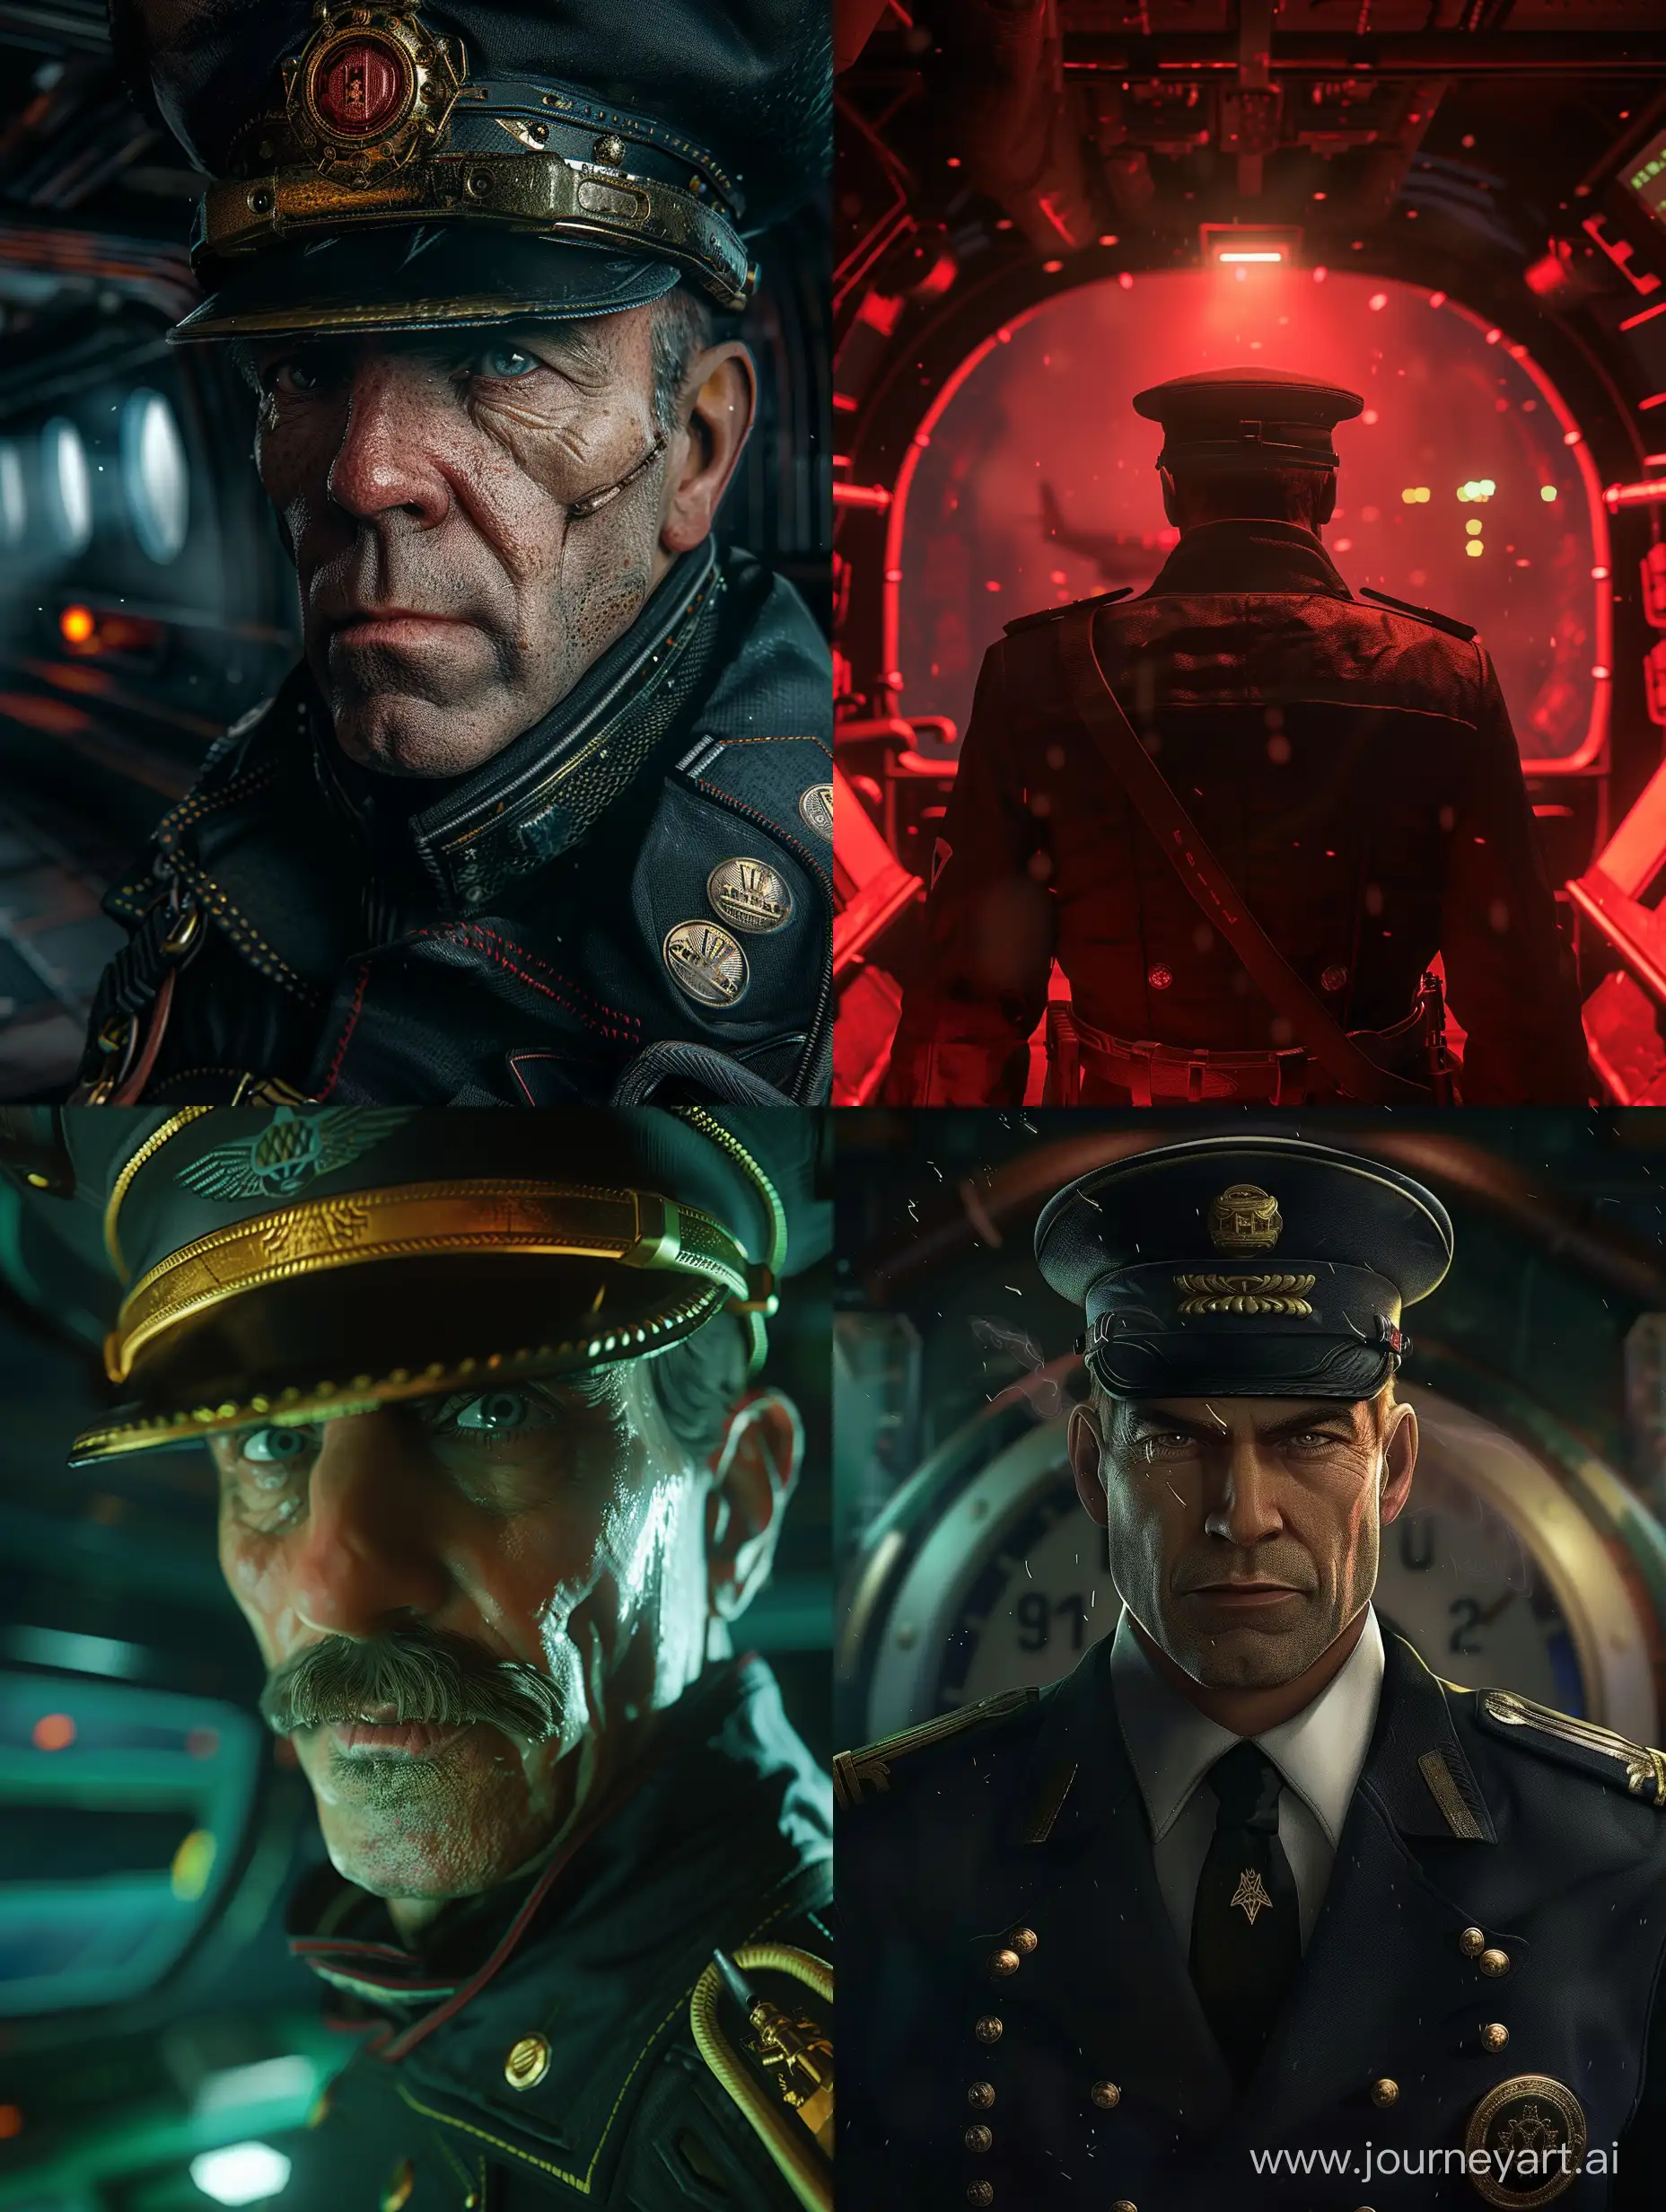 Intrepid-Captain-Confronting-the-Depths-in-Barotrauma-Game-Art